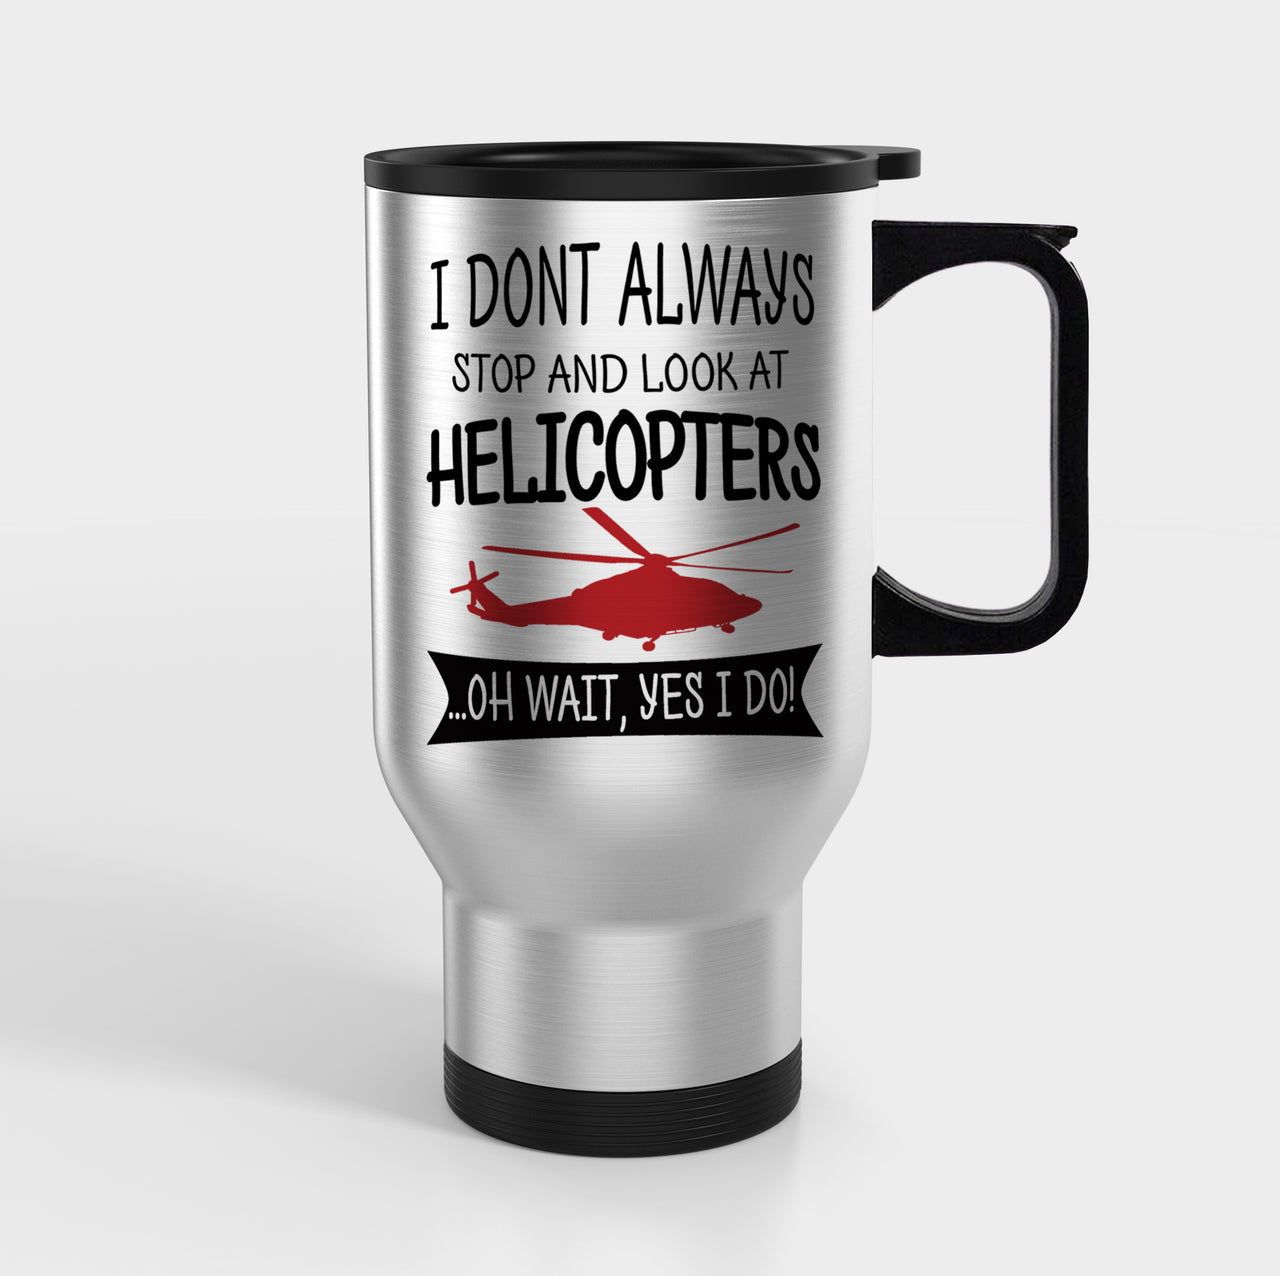 I Don't Always Stop and Look at Helicopters Designed Travel Mugs (With Holder)